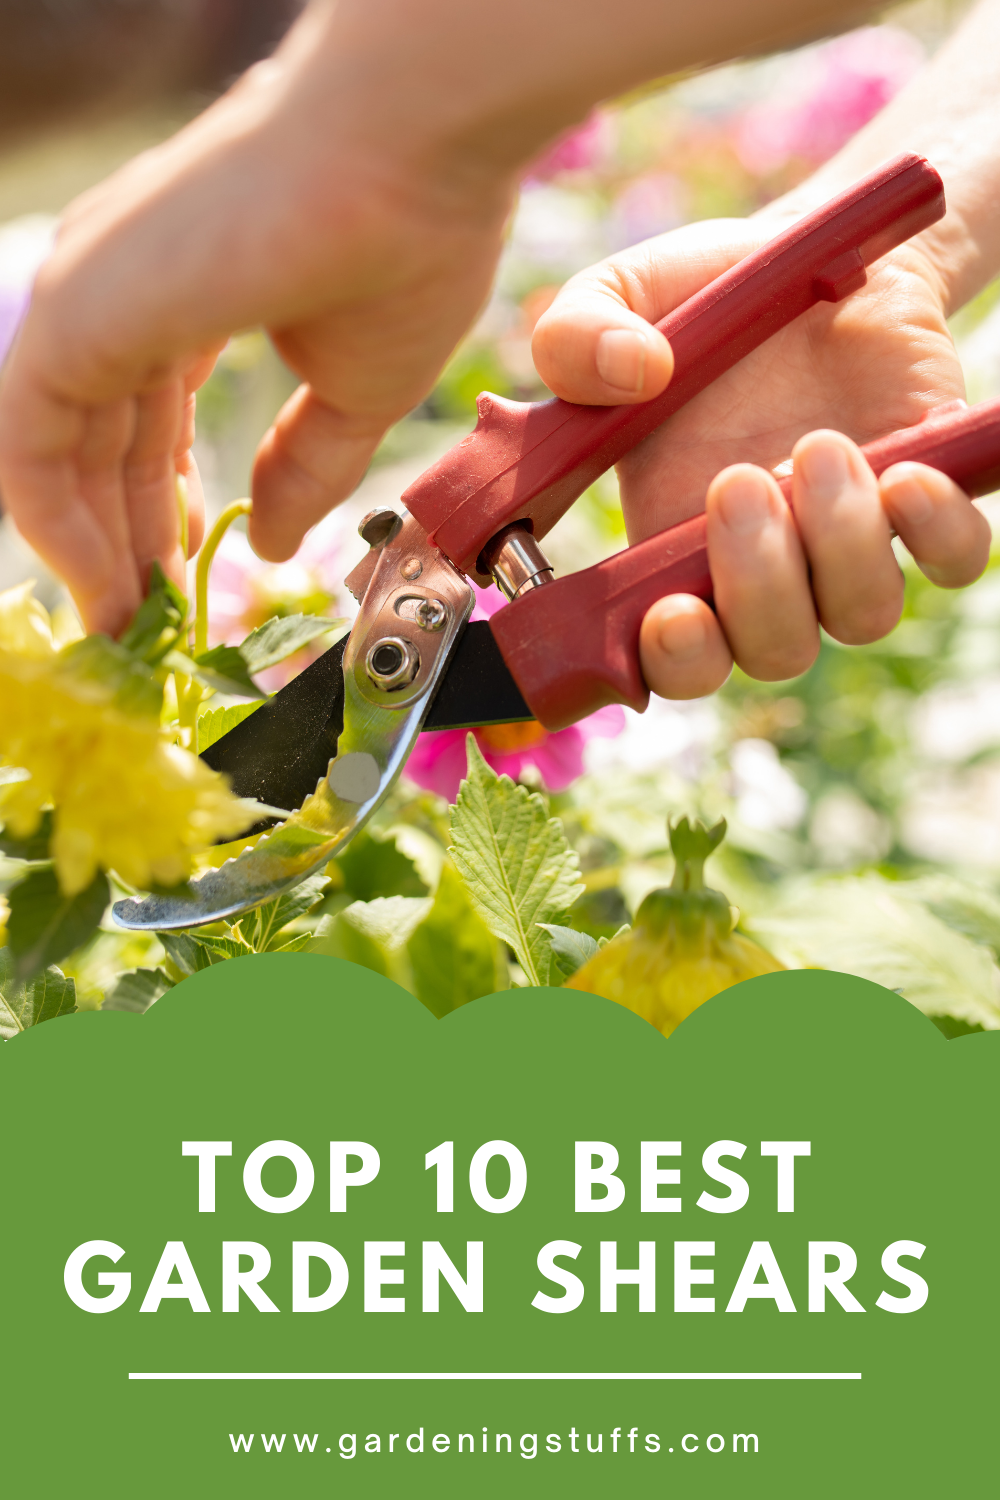 Read through our reviews and see how each pruning tool might help you with your trimming tasks. Then, learn more about the essential pruner features you need to look for using our buying guide. Let’s check the shears out.